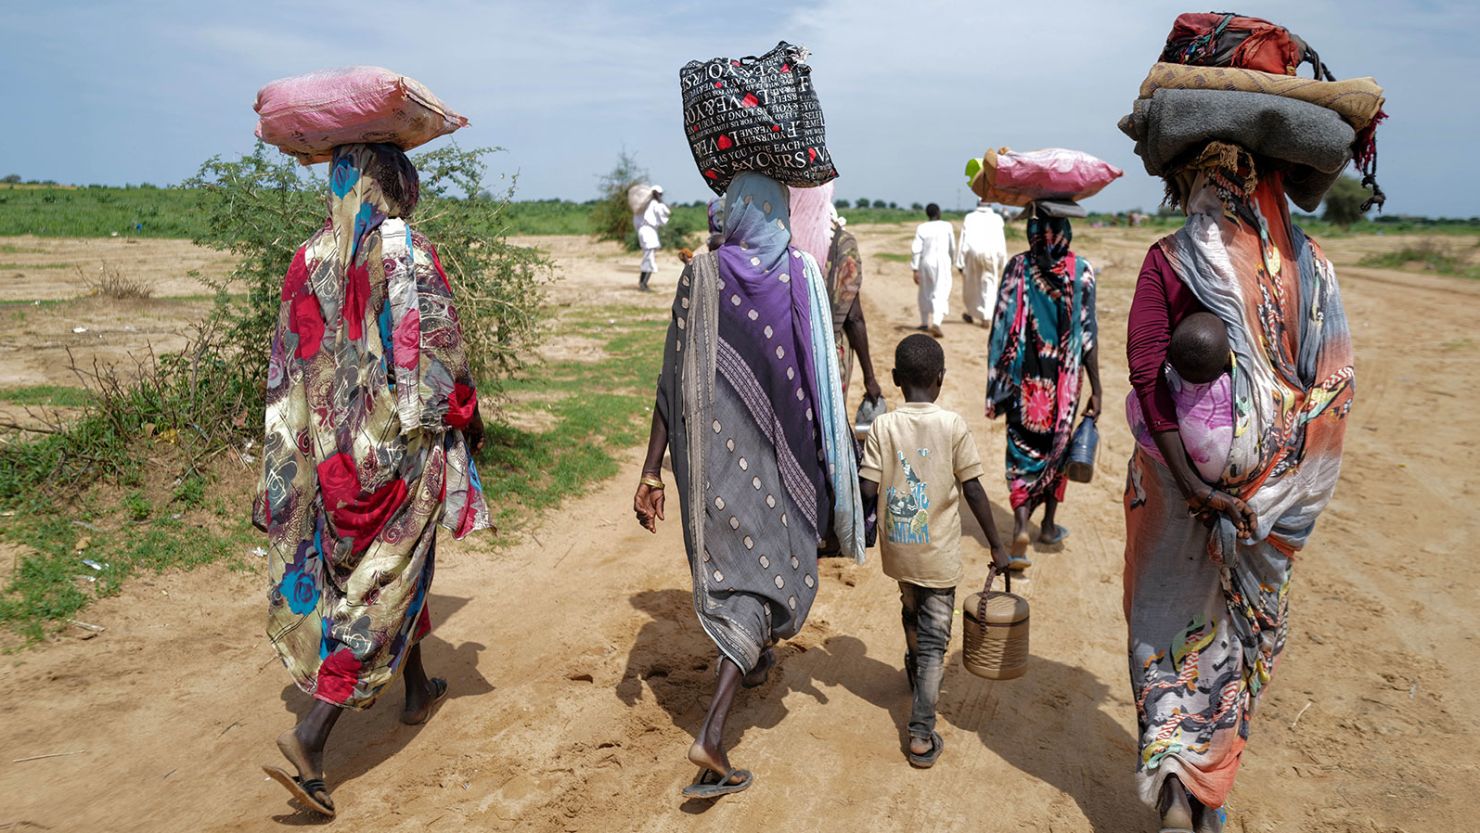 The UN reports increased incidents of gender-based violence among internally displaced Sudanese populations. 